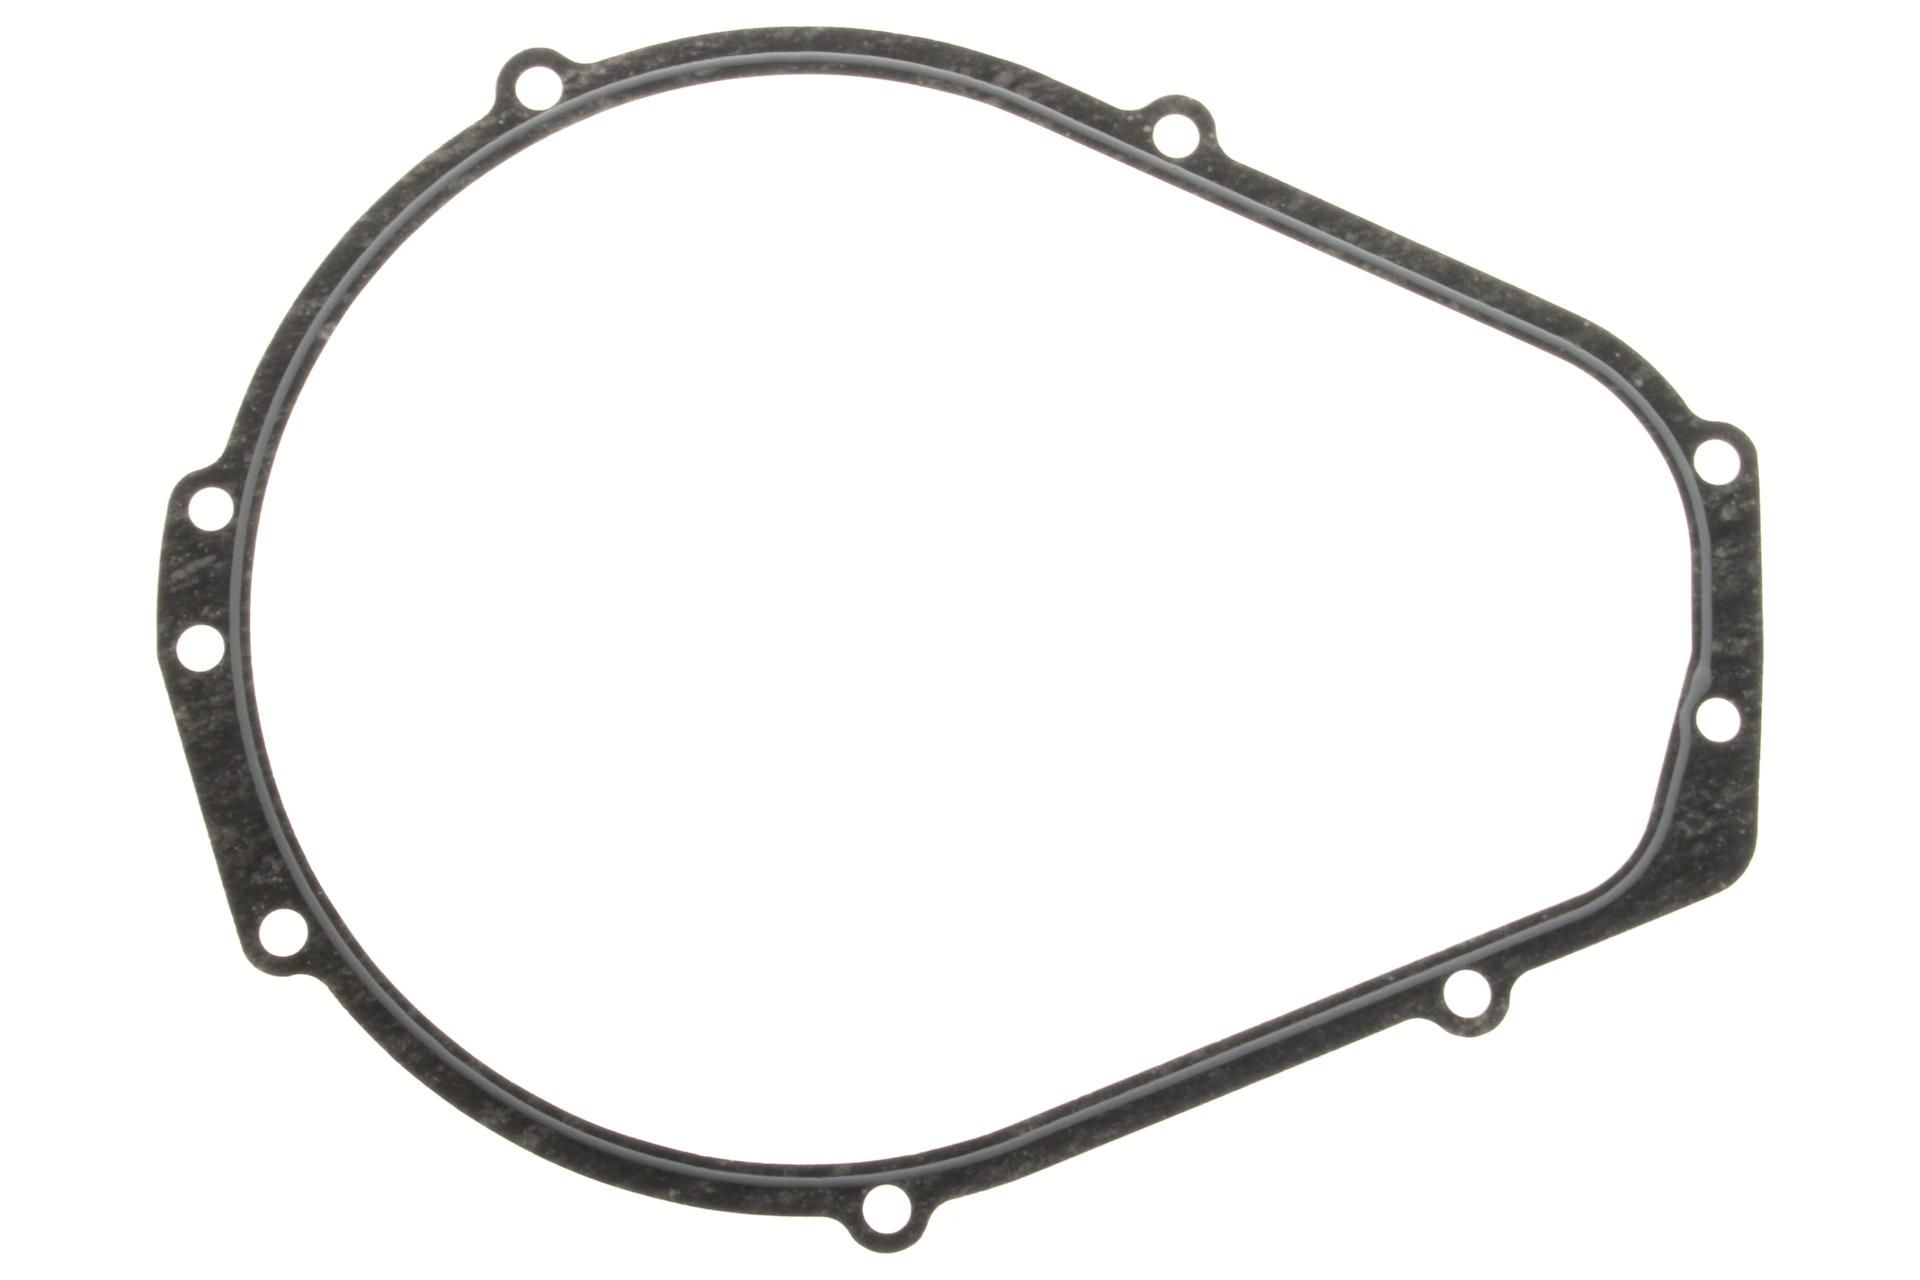 6M6-81365-A0-00 HOLE COVER GASKET